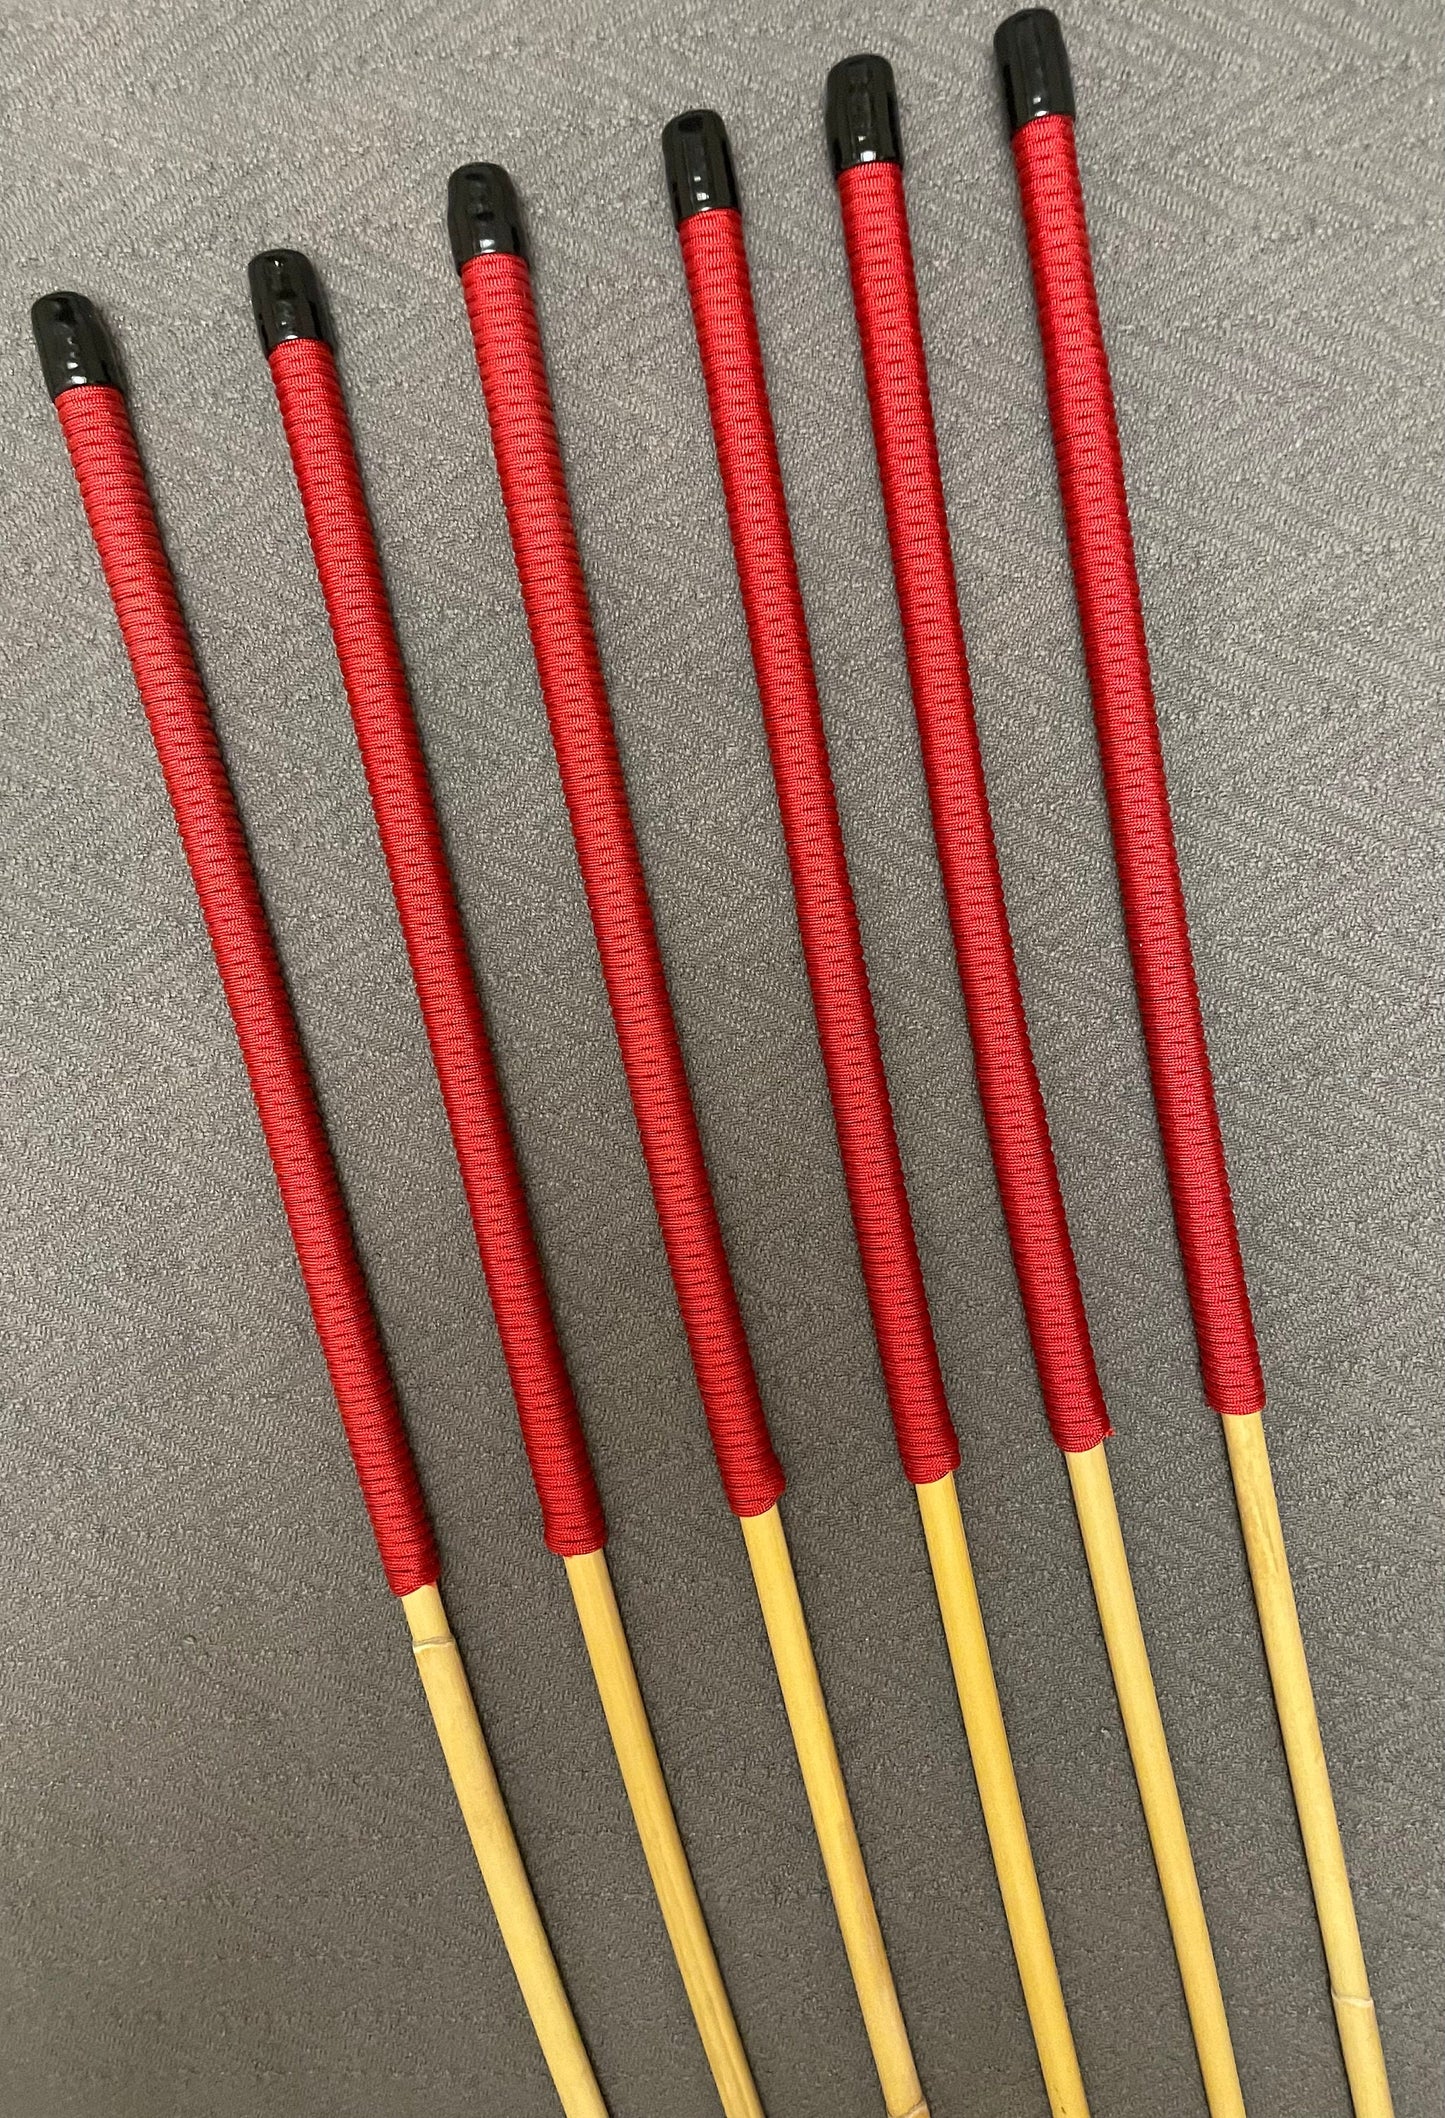 Thick and Thuddy Dragon Cane Set of 6 Rattan Canes / Whipping Canes / BDSM Canes - 100 cms Length - Red Paracord Handles